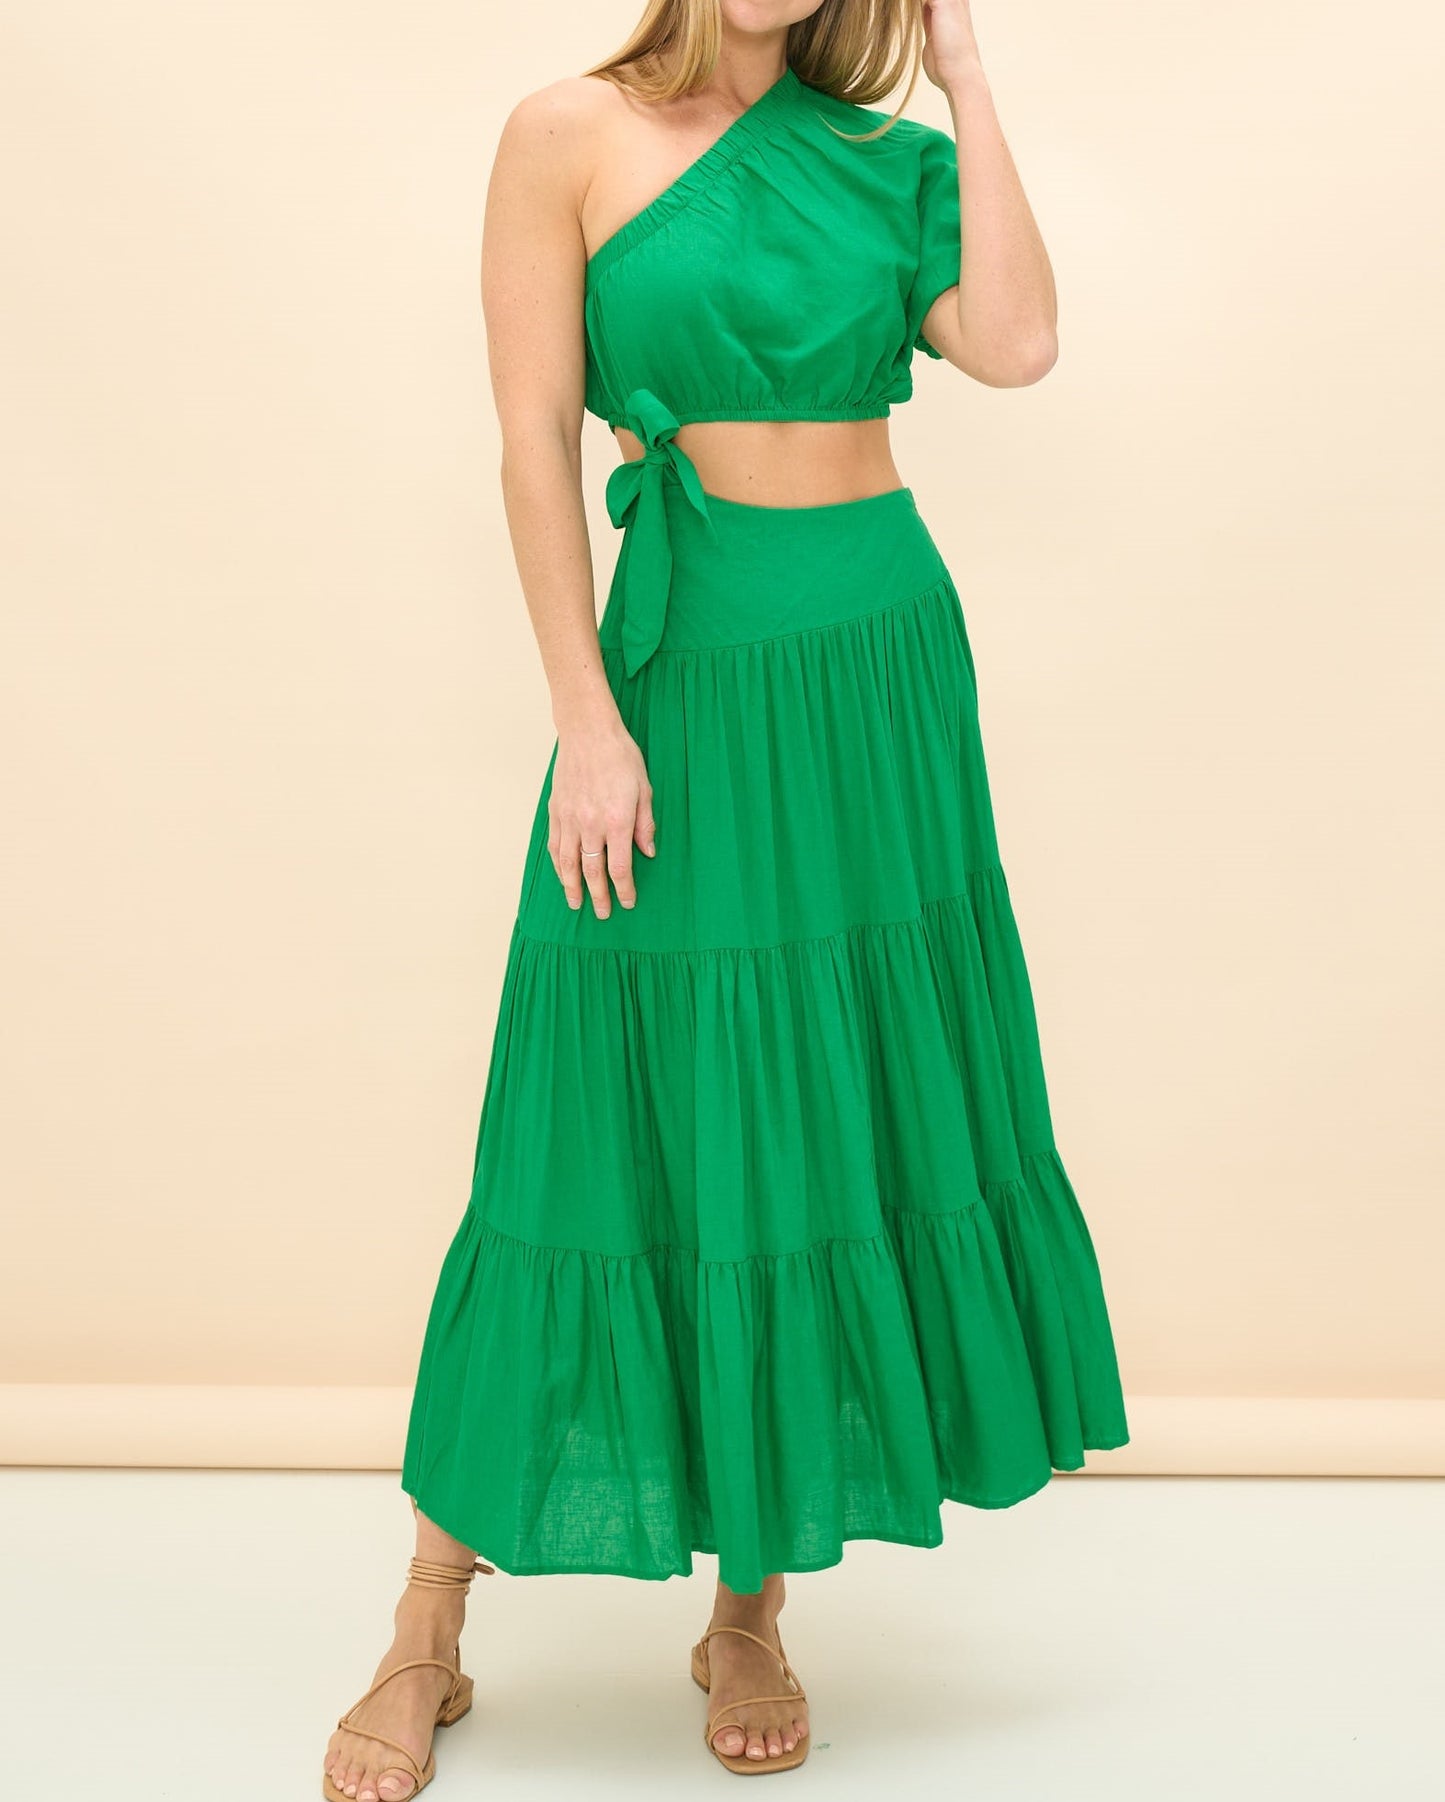 Wits the Label - One Shoulder Dress - Green